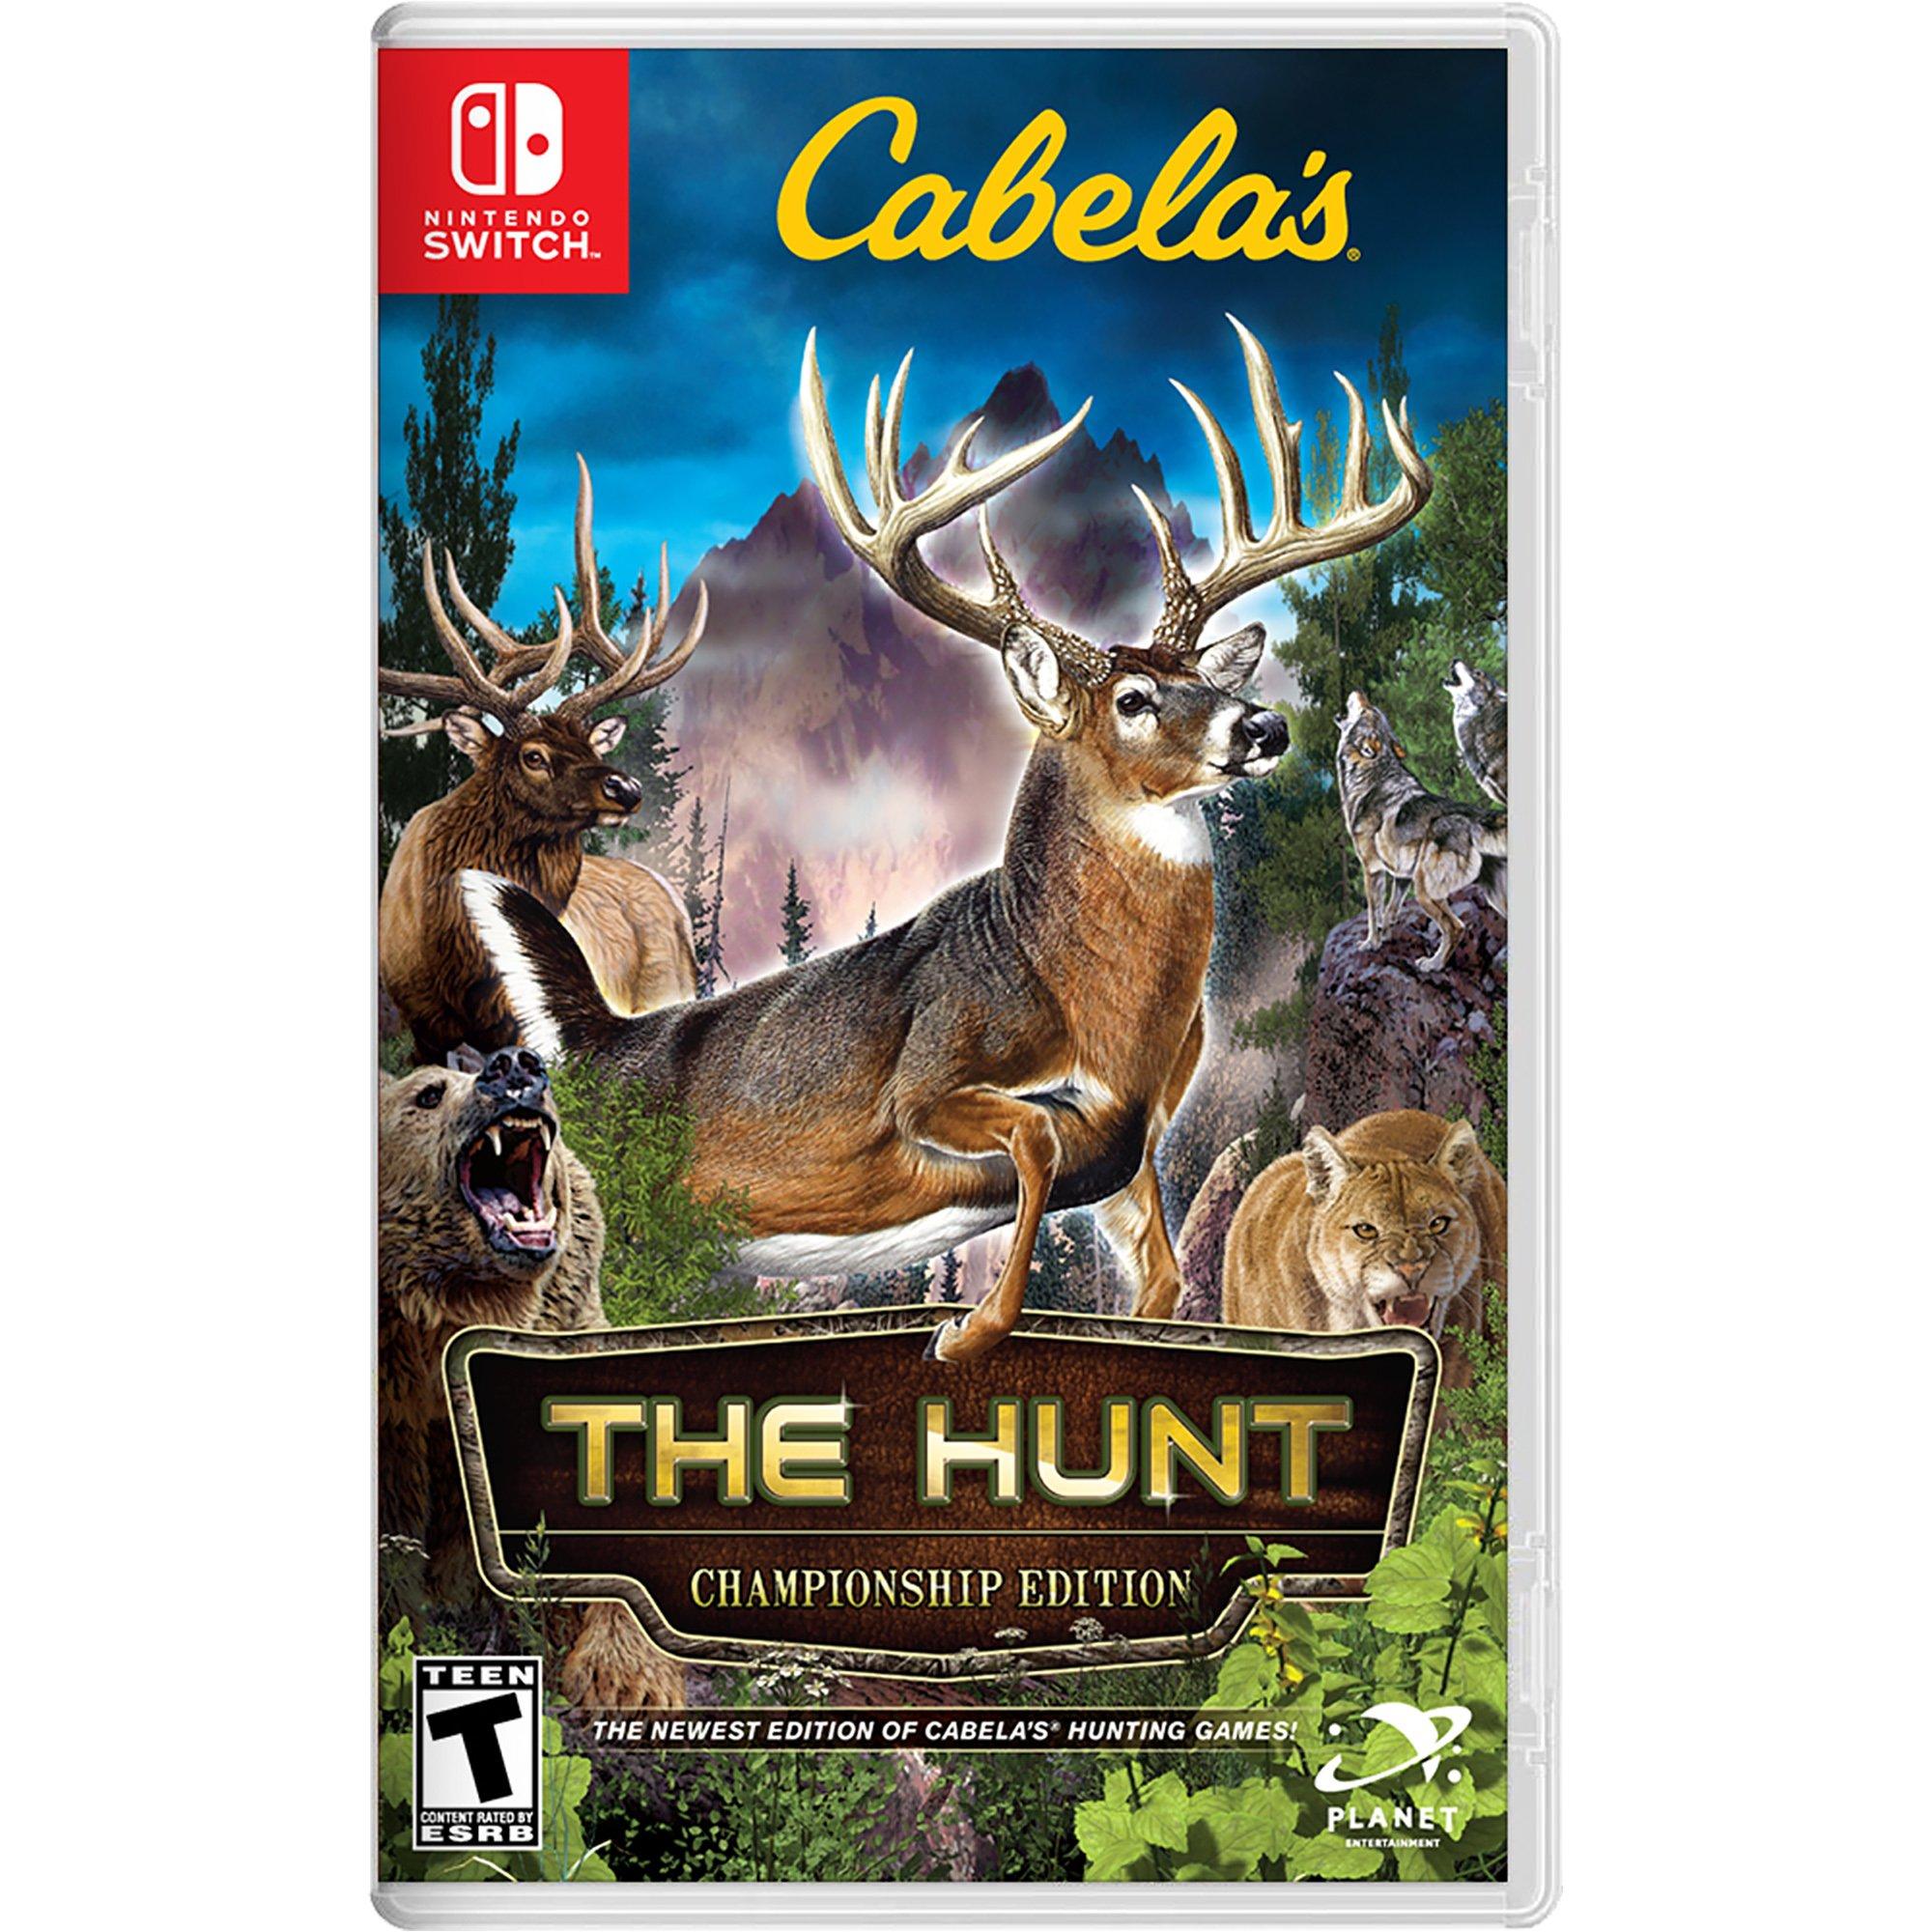 Cabela's Display, Display in Cabela's hunting and fishing s…